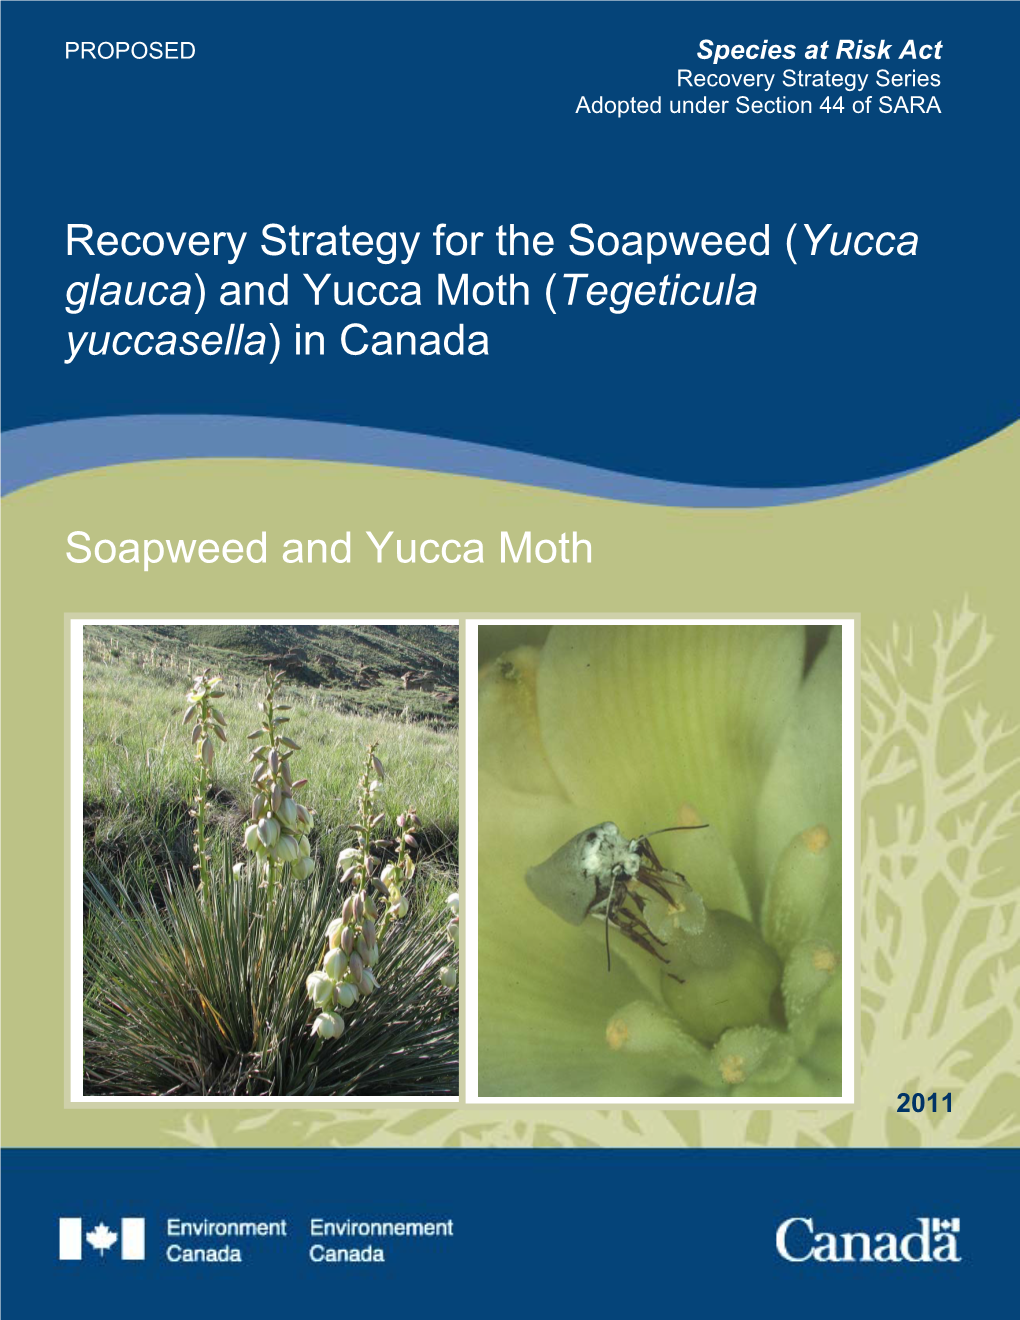 Soapweed (Yucca Glauca) and Yucca Moth (Tegeticula Yuccasella) in Canada